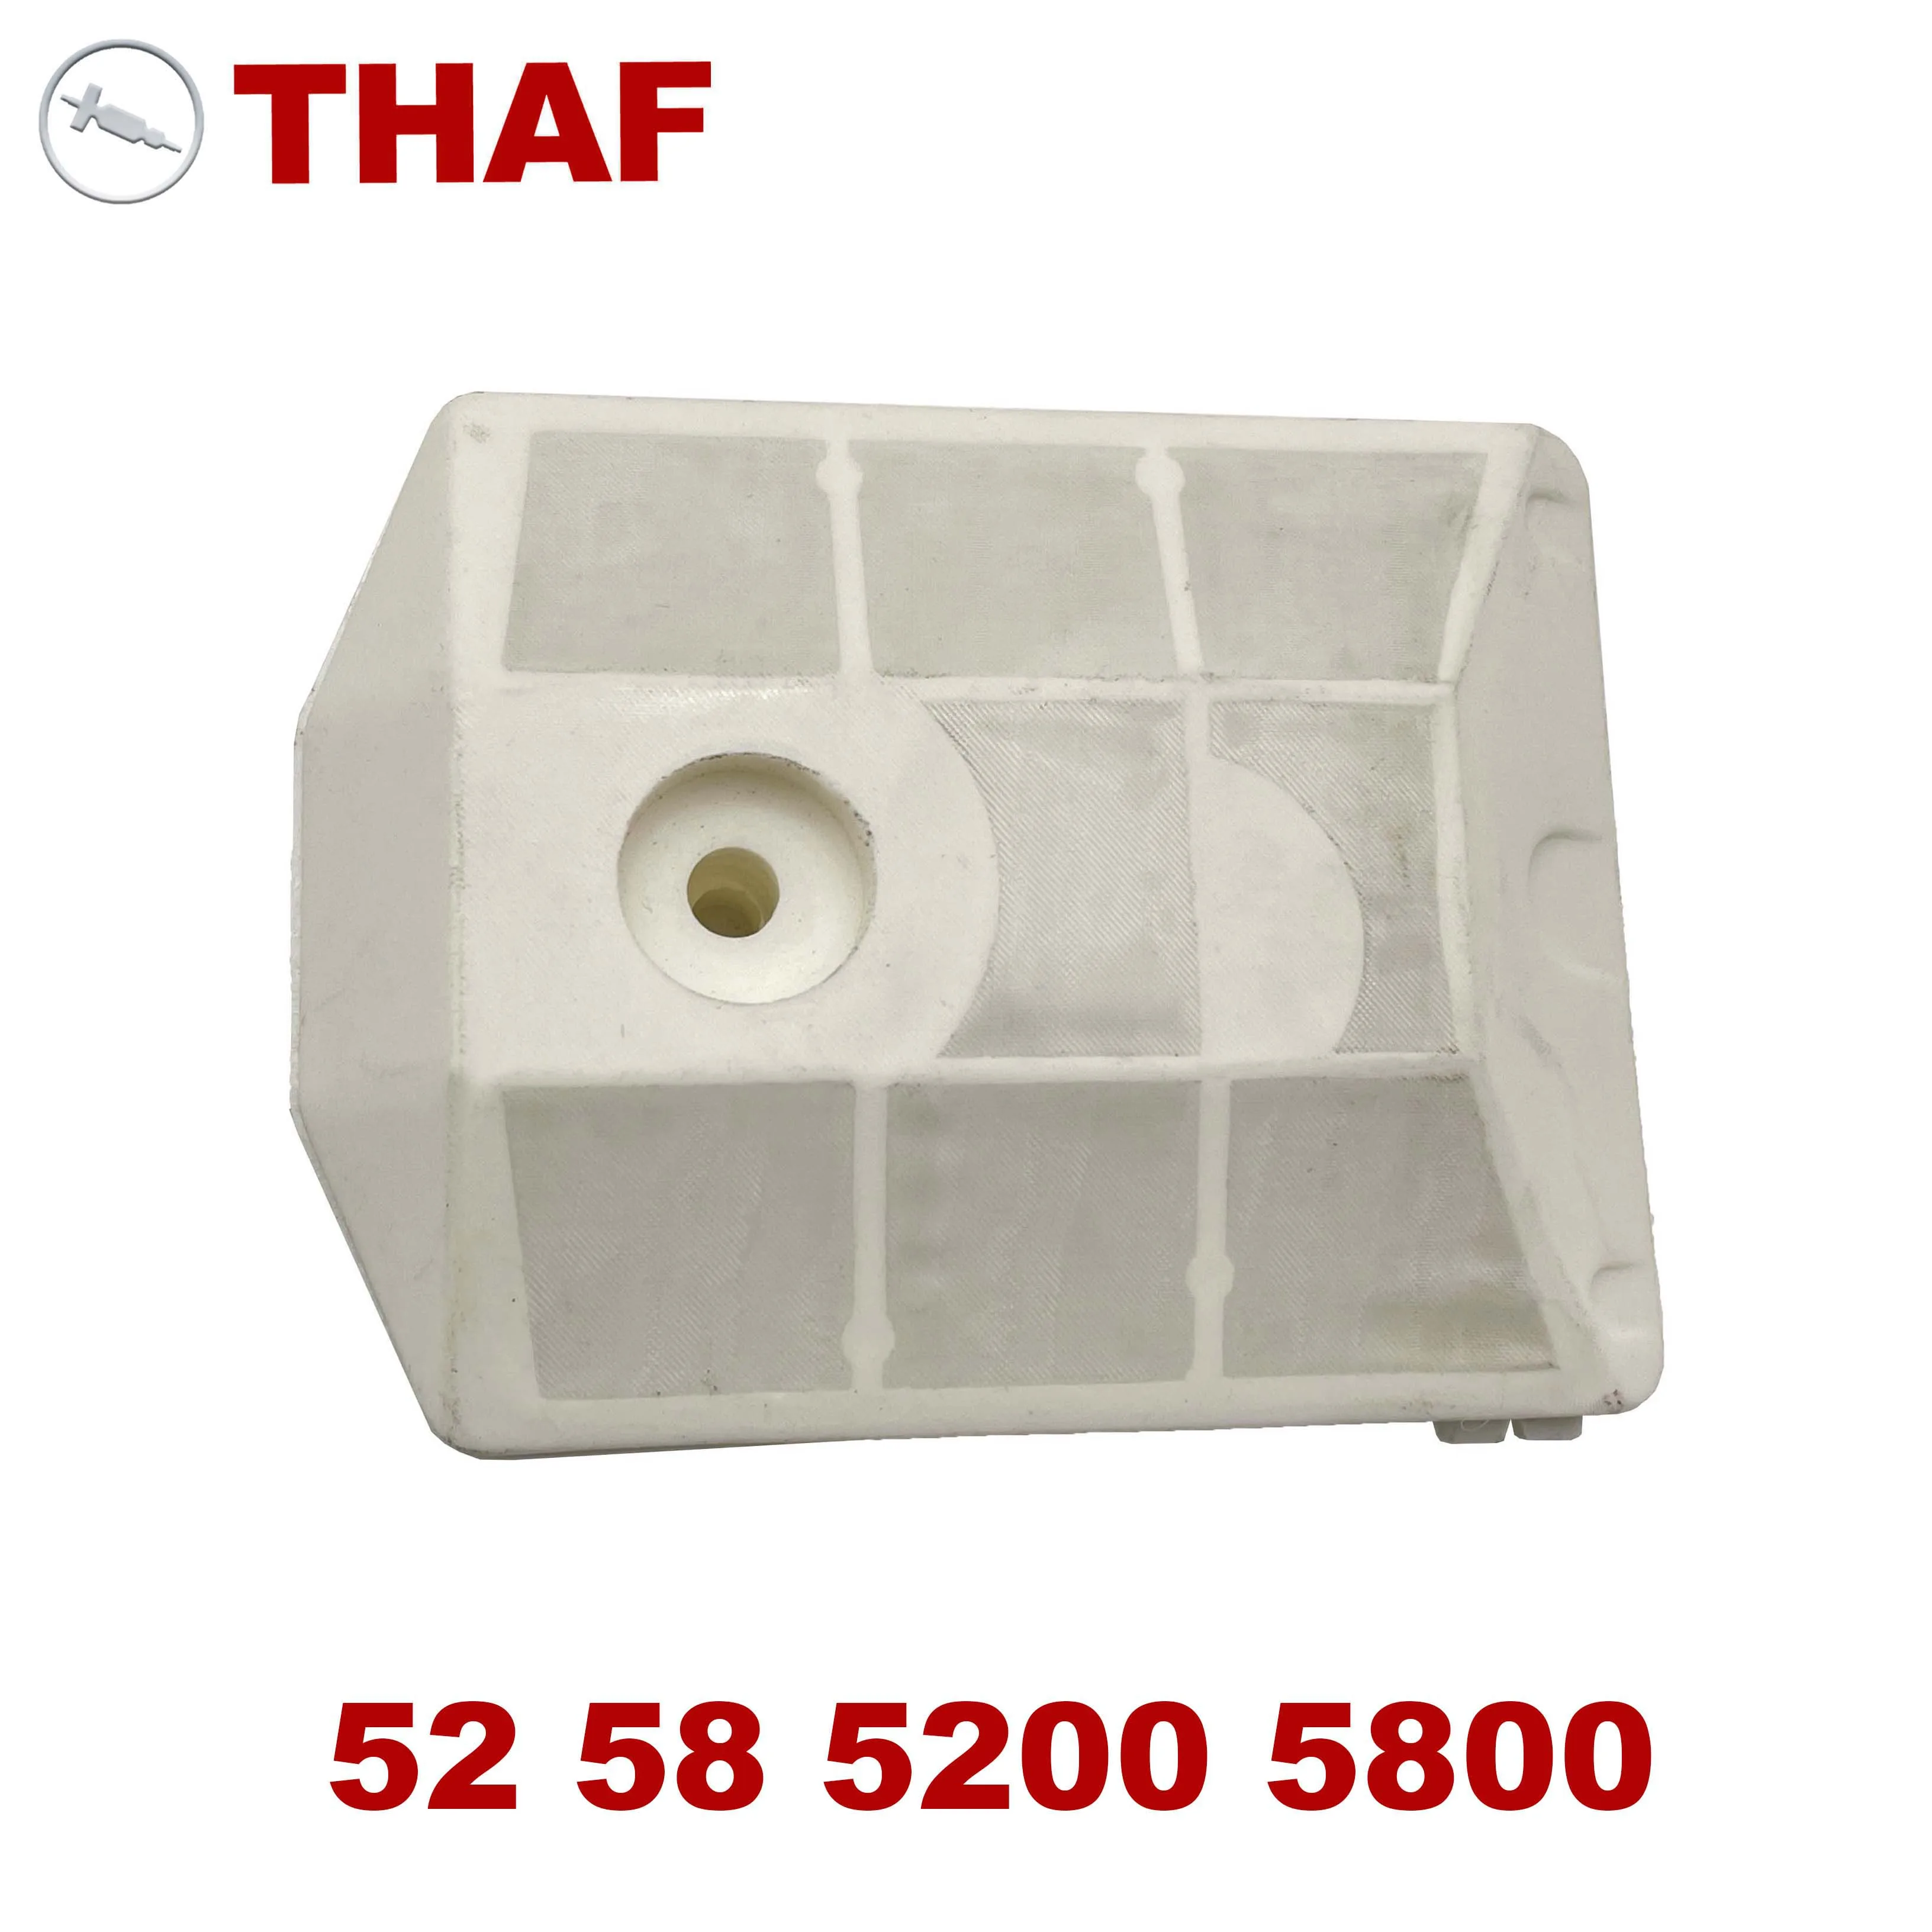 

THAF Replacement Garden Tools Spare Parts Air Filter Assy for STIHL ChainSaw 52 58 5200 5800